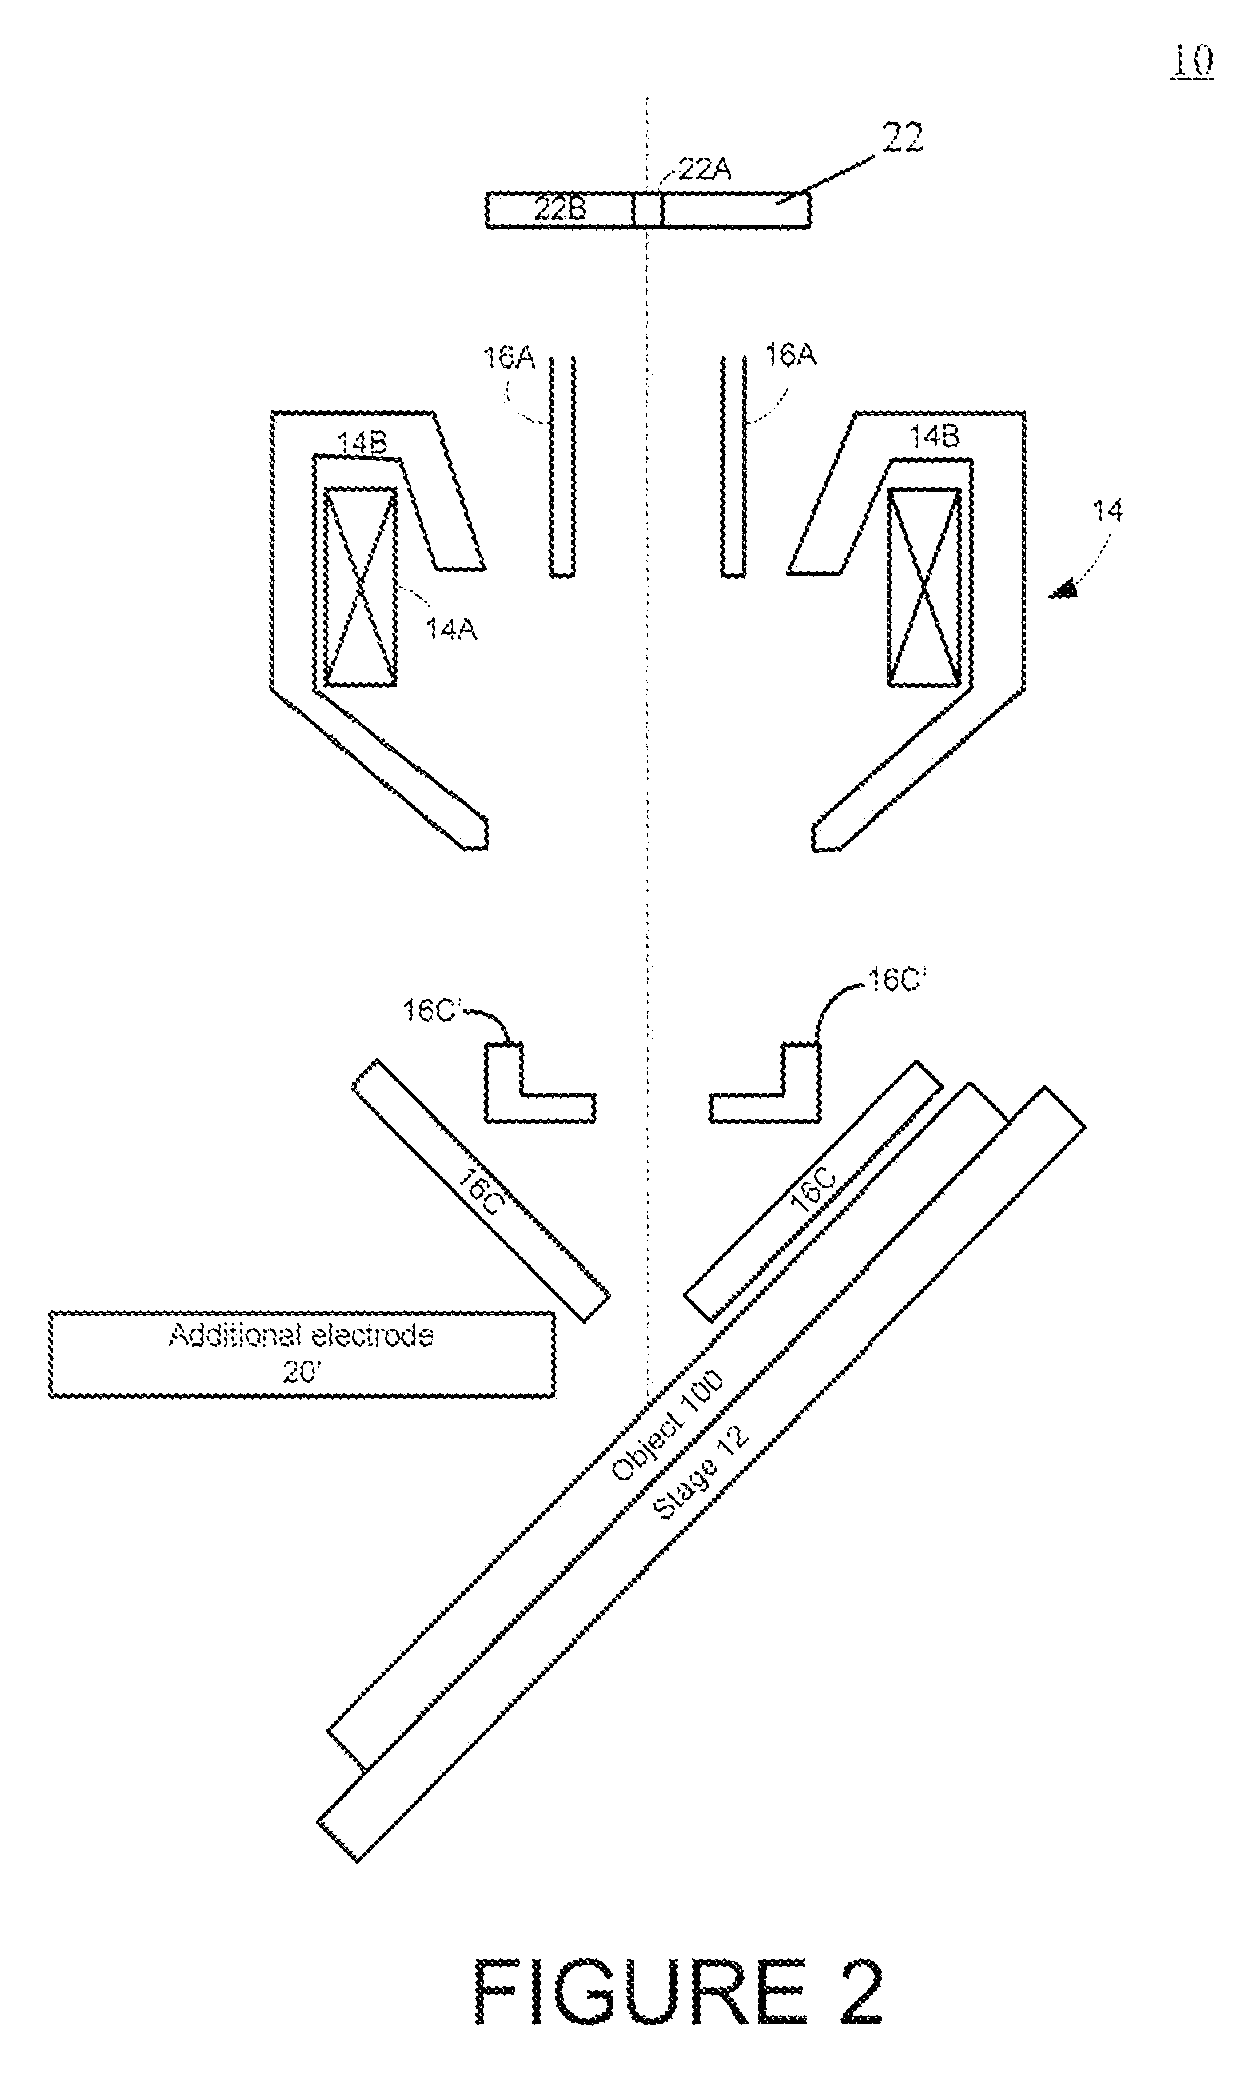 Multiple electrode lens arrangement and a method for inspecting an object